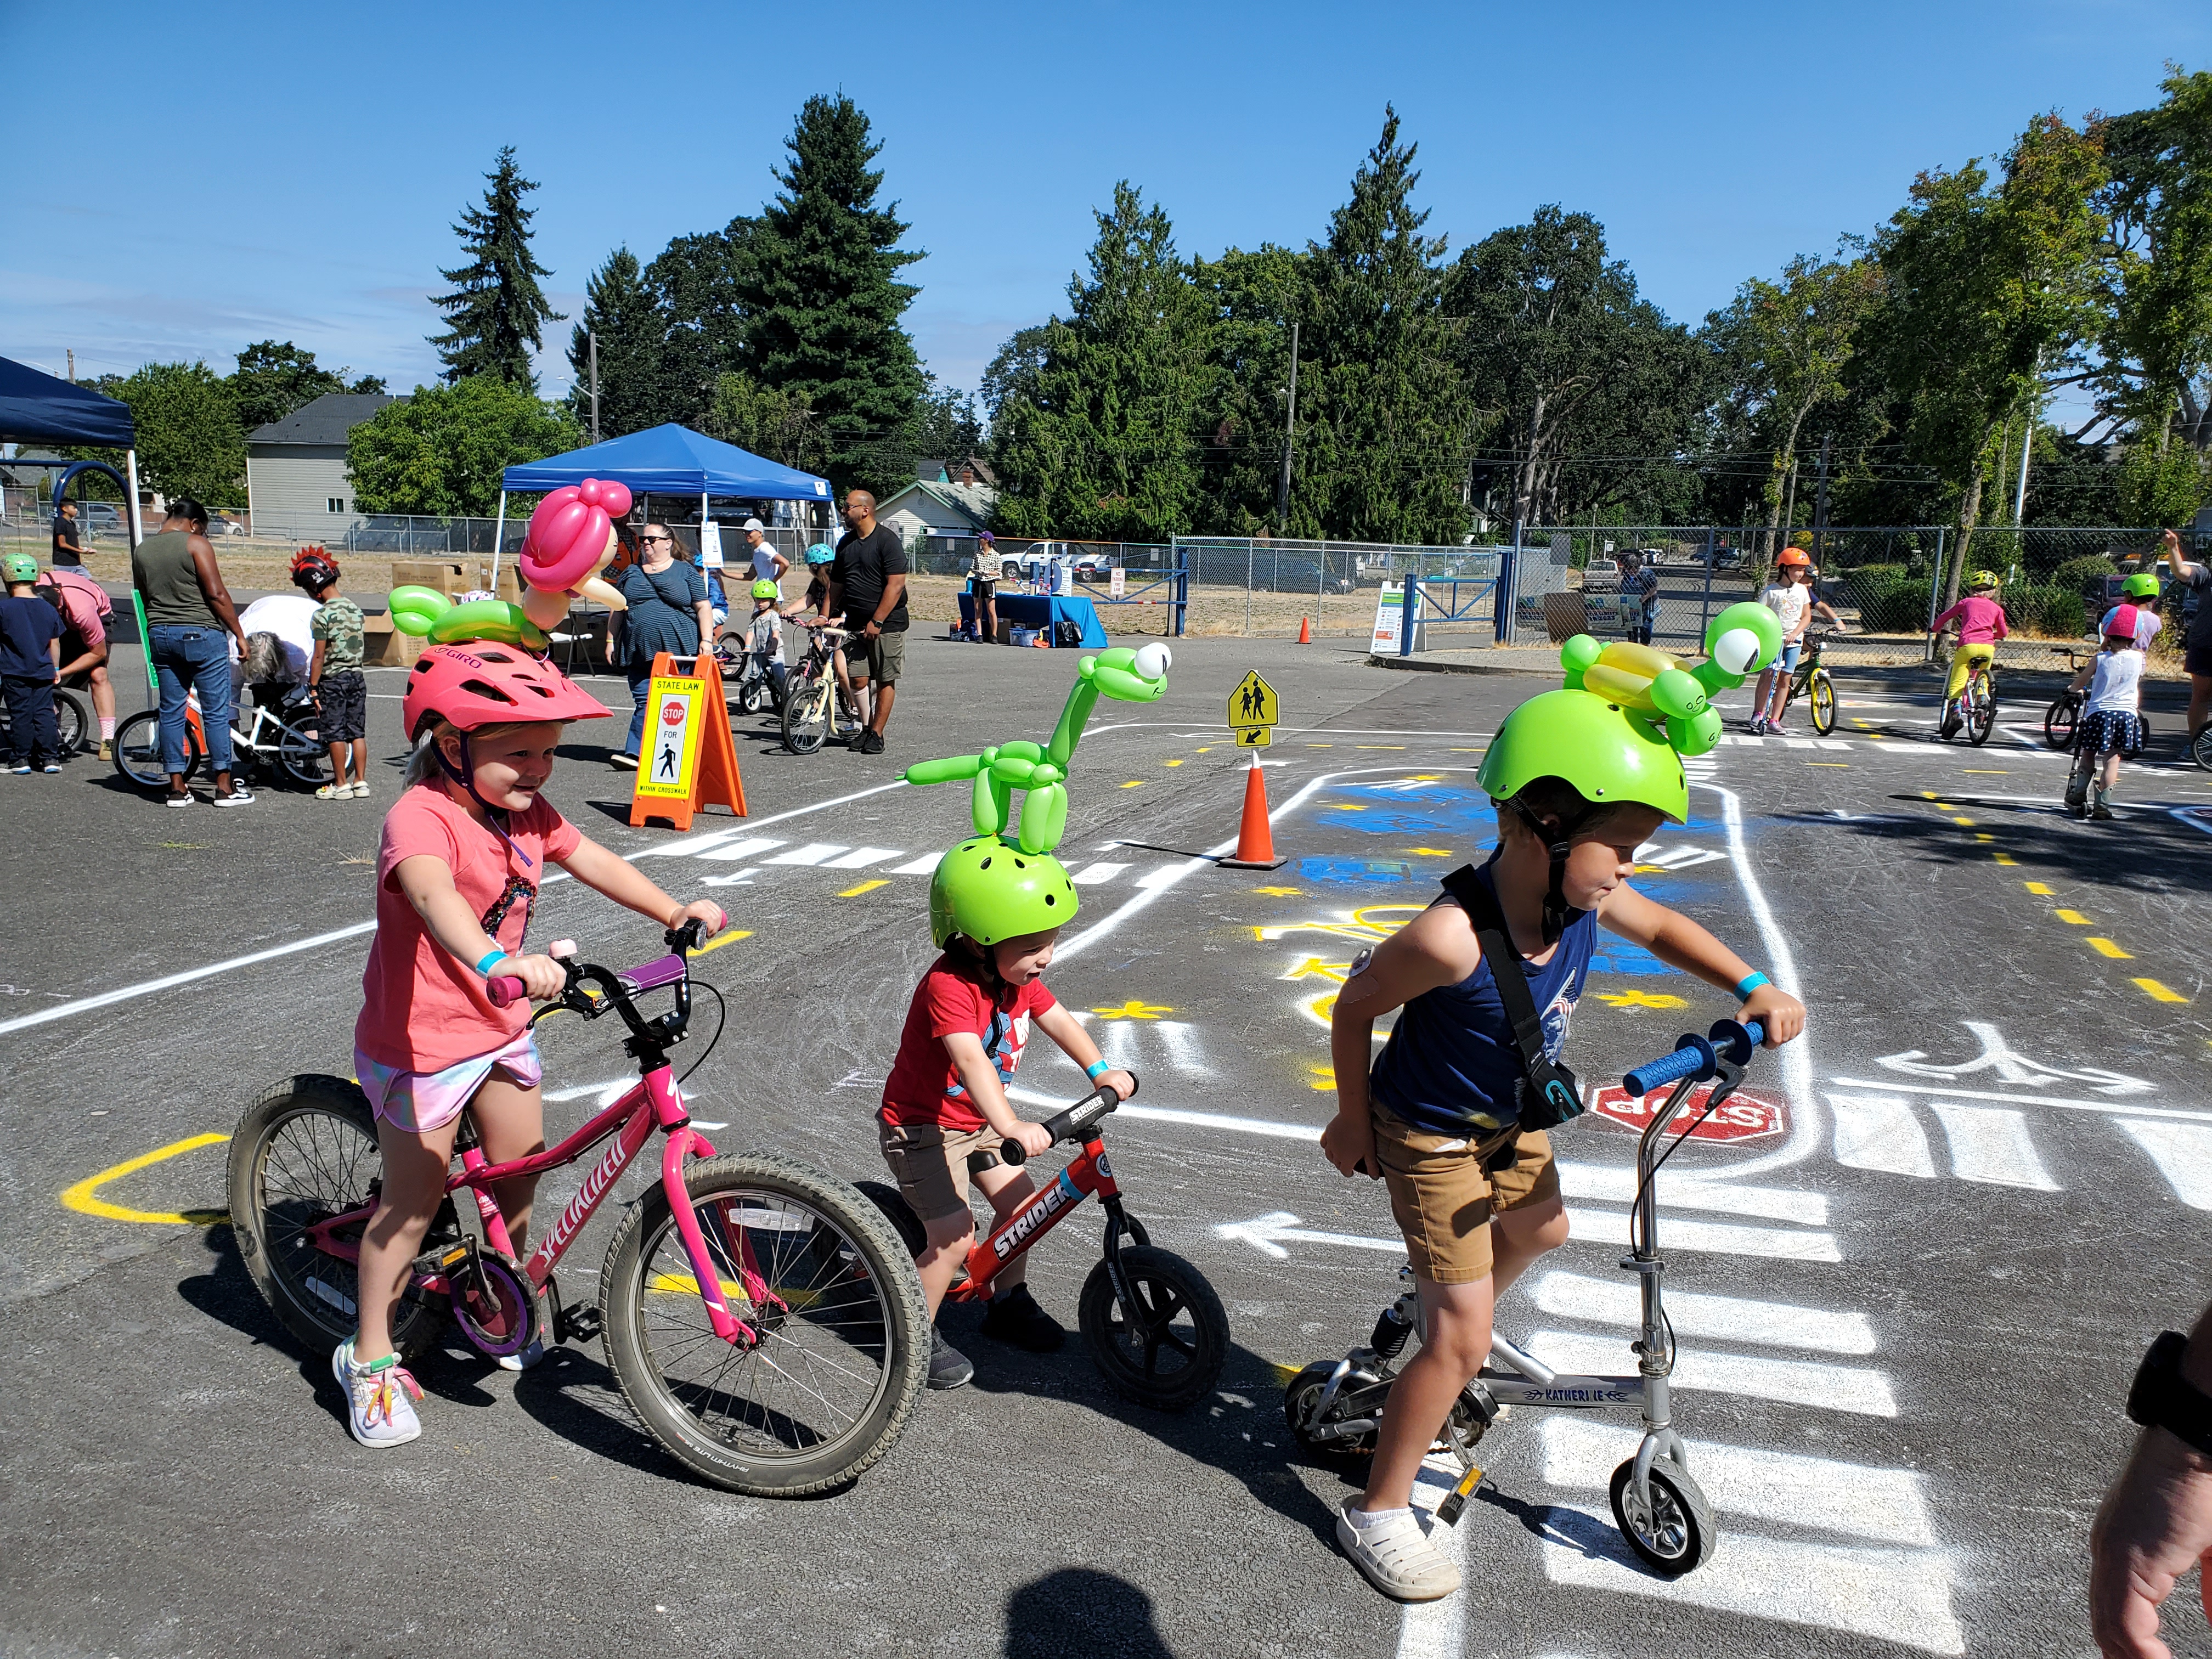 kids on bikes and scooters wearing bright colored helmets and practicing biking safety at a traffic garden. they are stopped at a 3-way stop intersection learning about stop signs and hand signals.